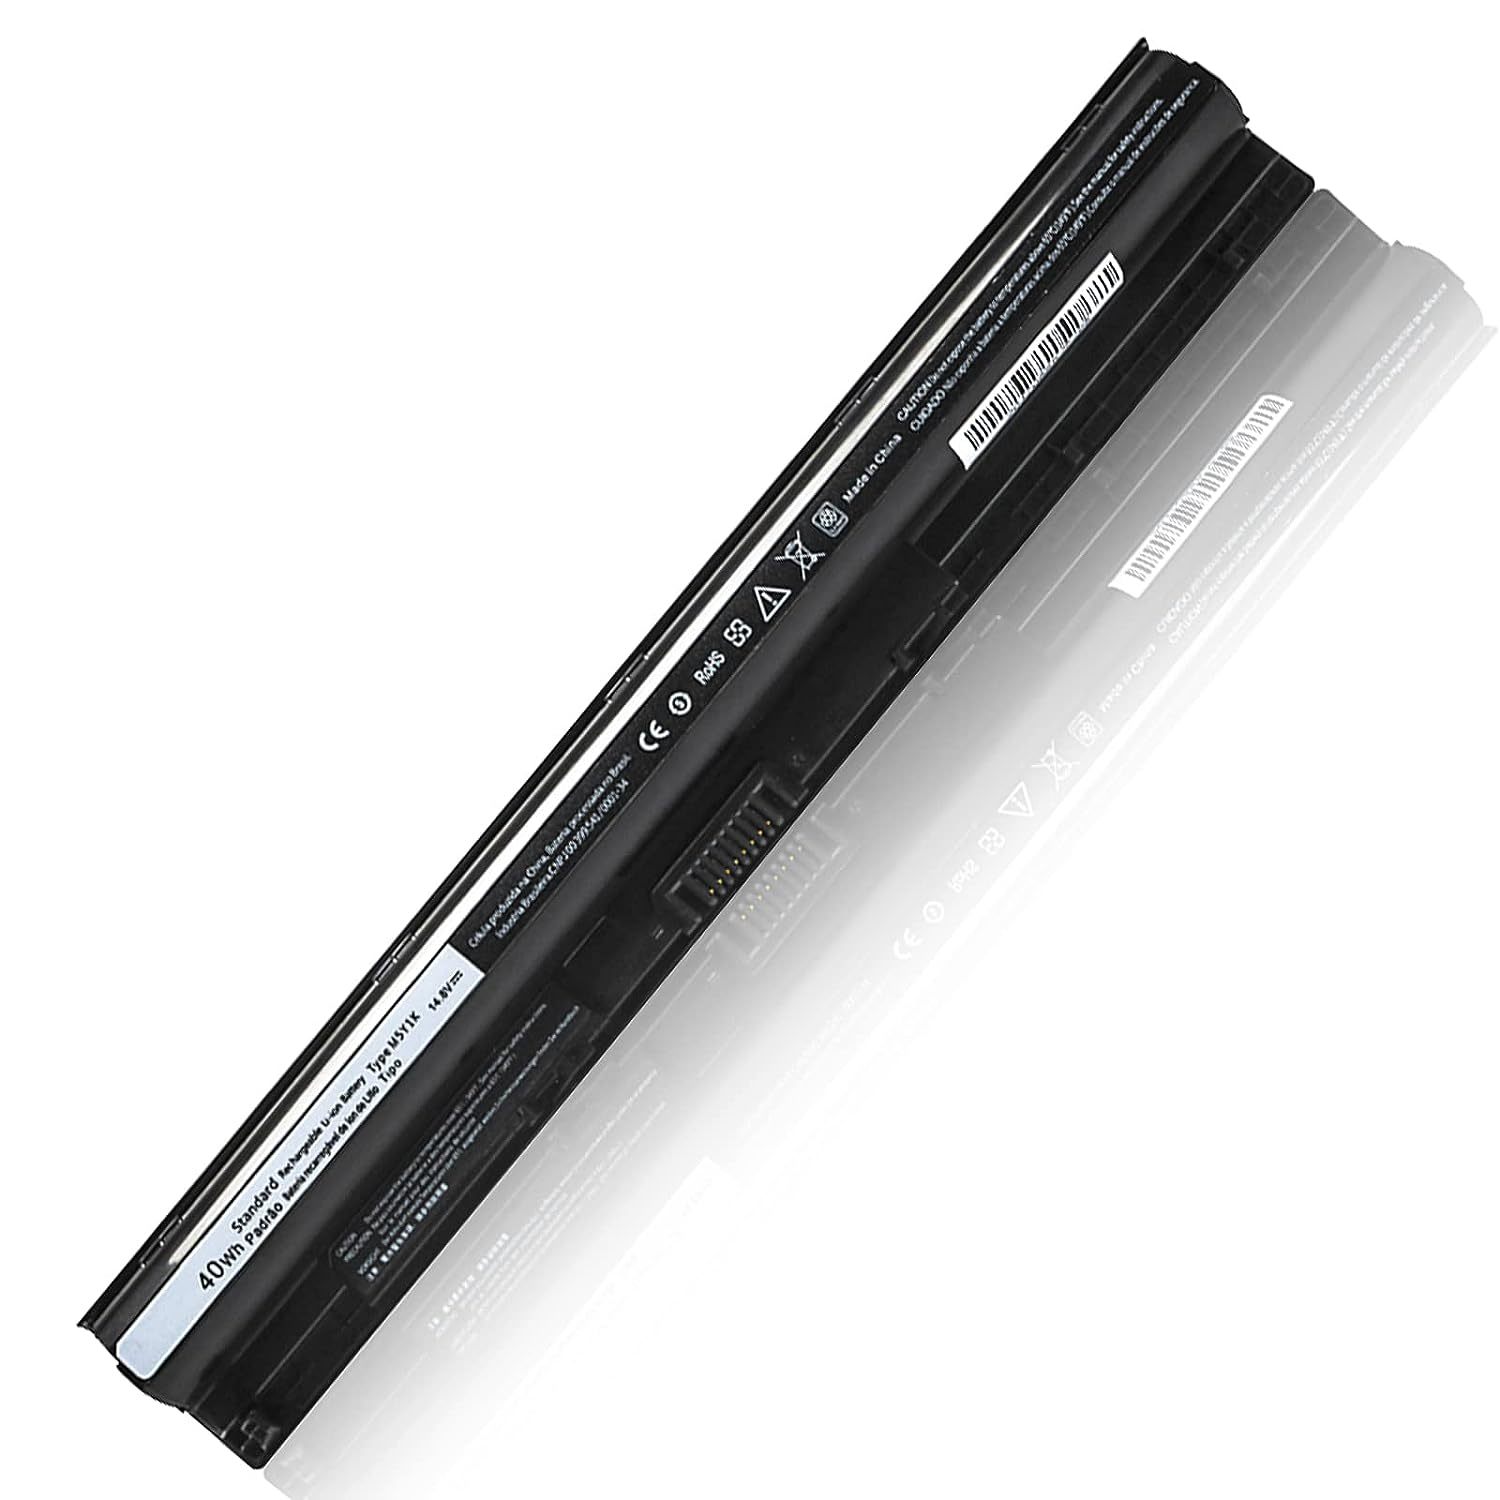 New M5Y1K Laptop Battery For Dell Inspiron 15 5000 5555 5558 5559 3552 3558 3567 - $43.99